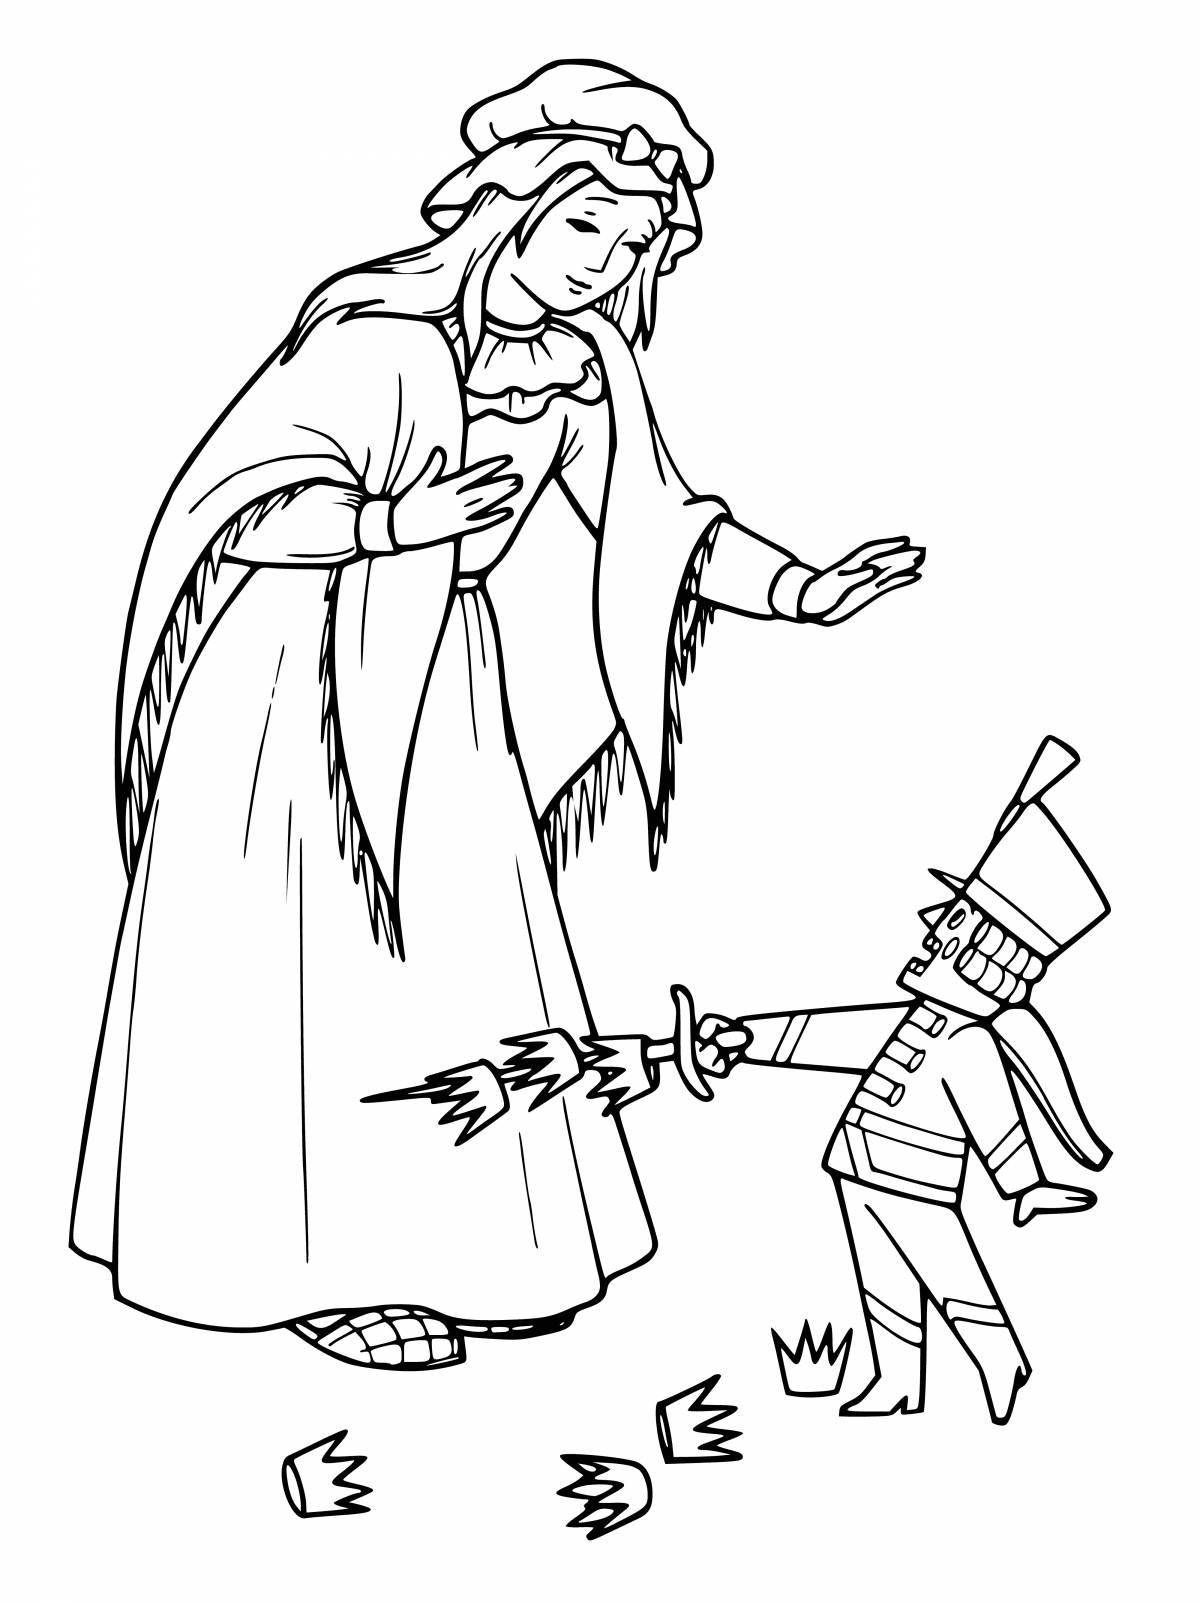 Coloring page elegant nutcracker and mouse king